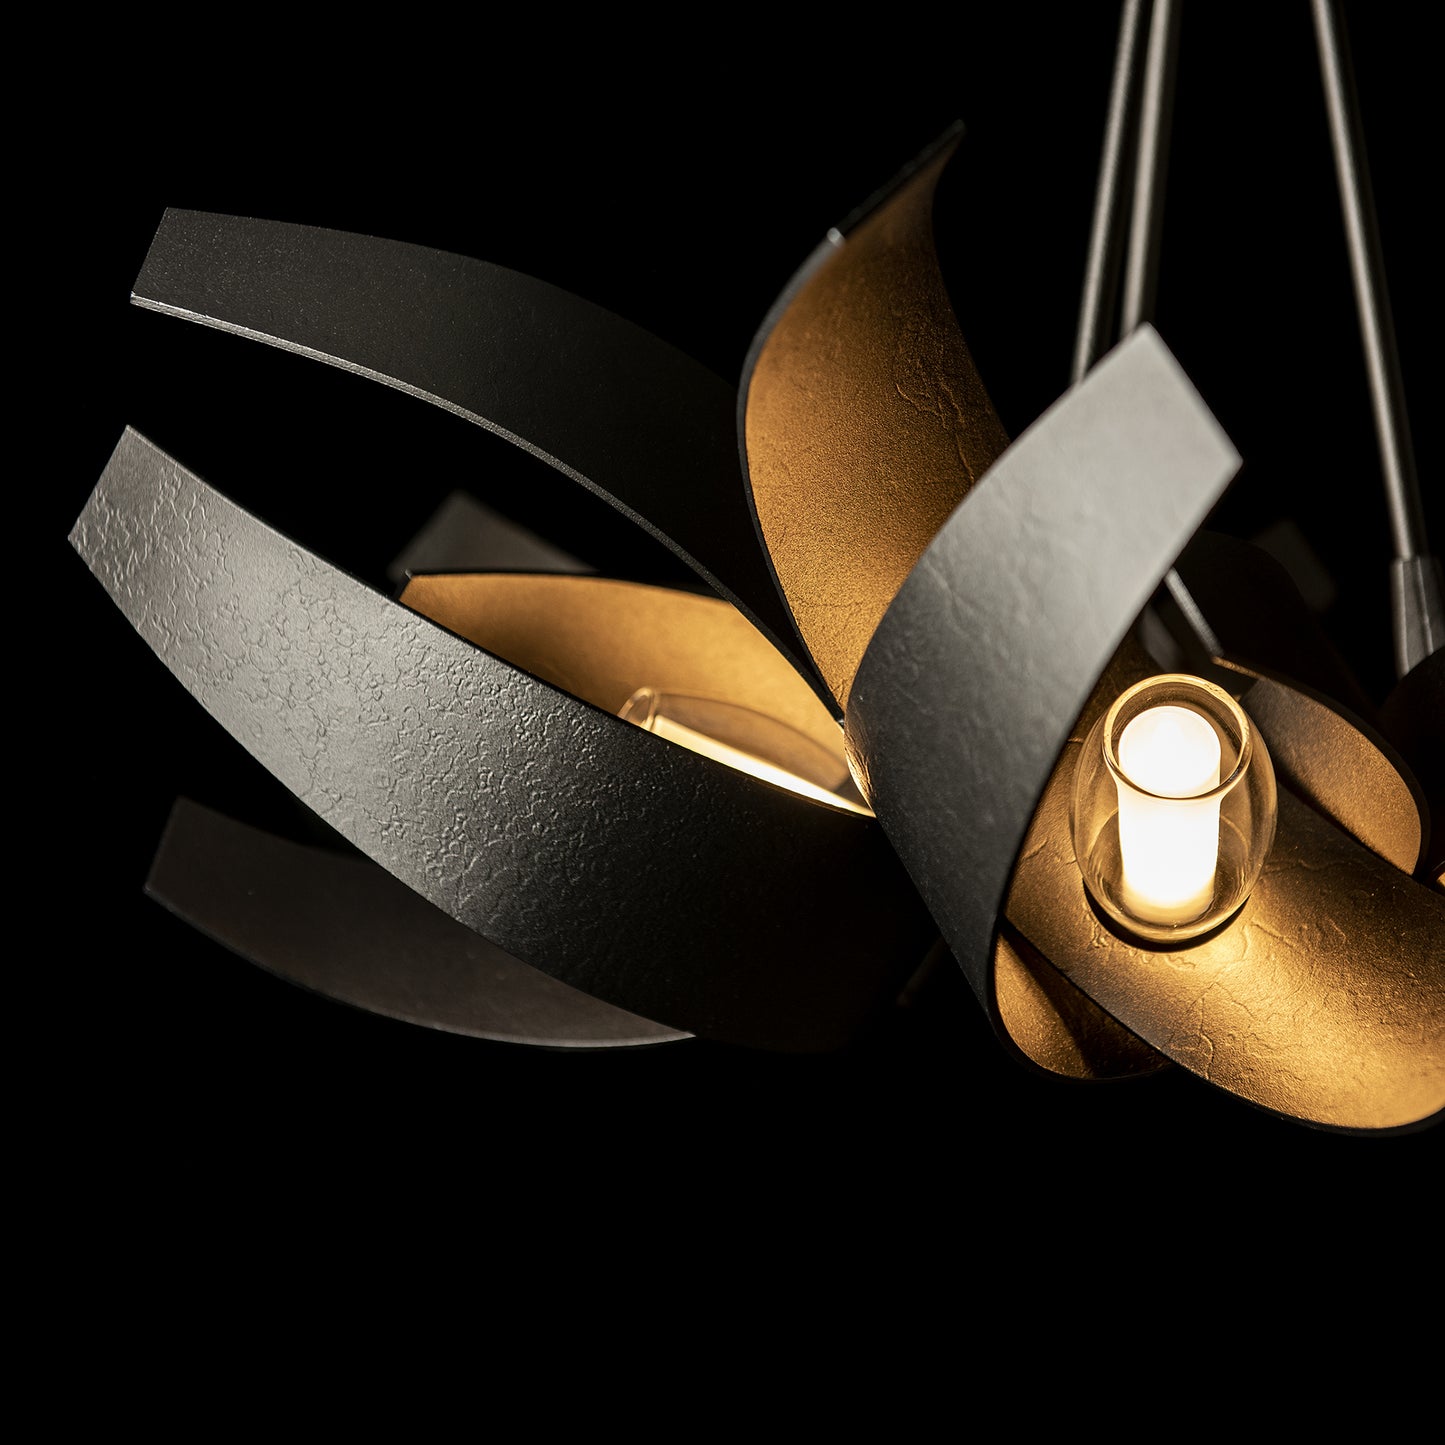 A Hubbardton Forge Corona Pendant, which is a designer pendant light with a black and gold design.